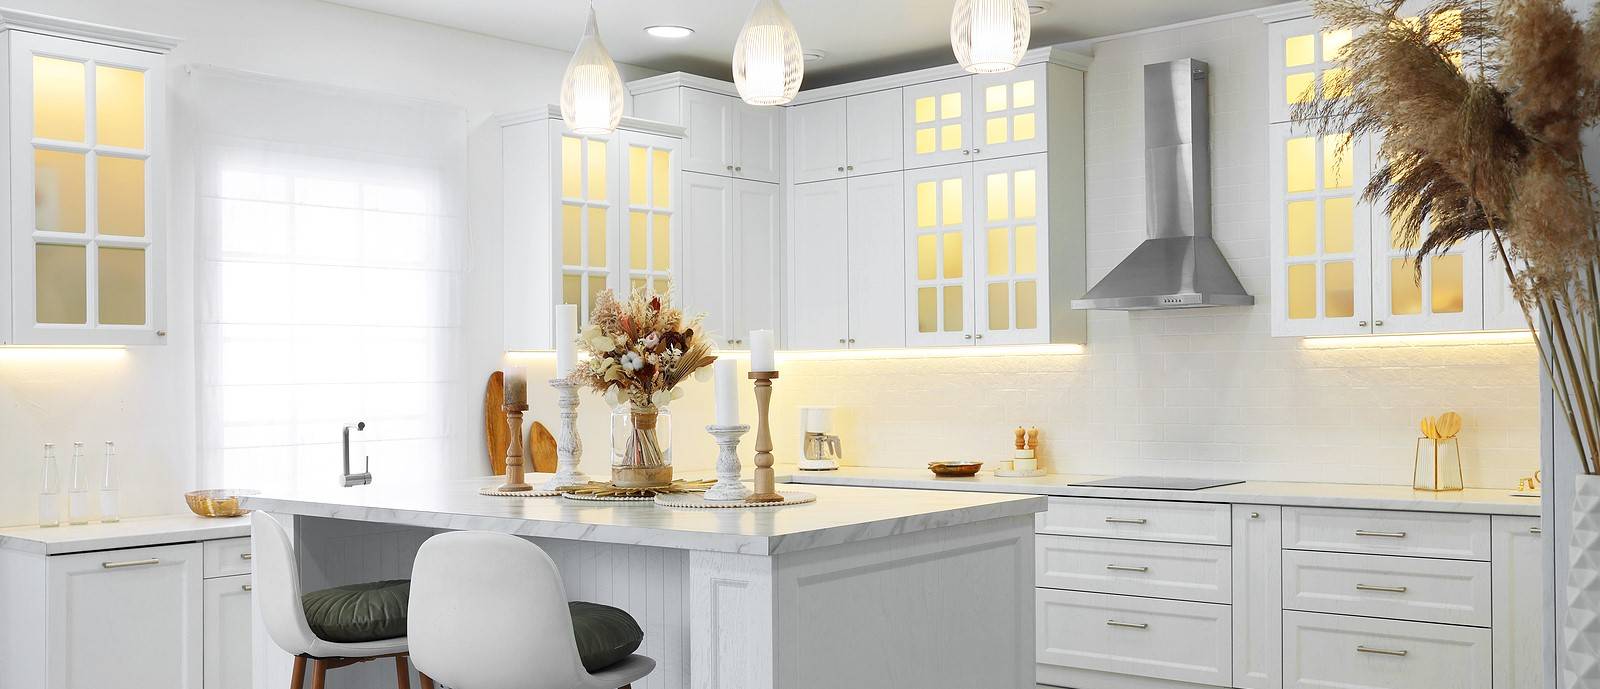 How to Choose the Right Countertop for Your Kitchen